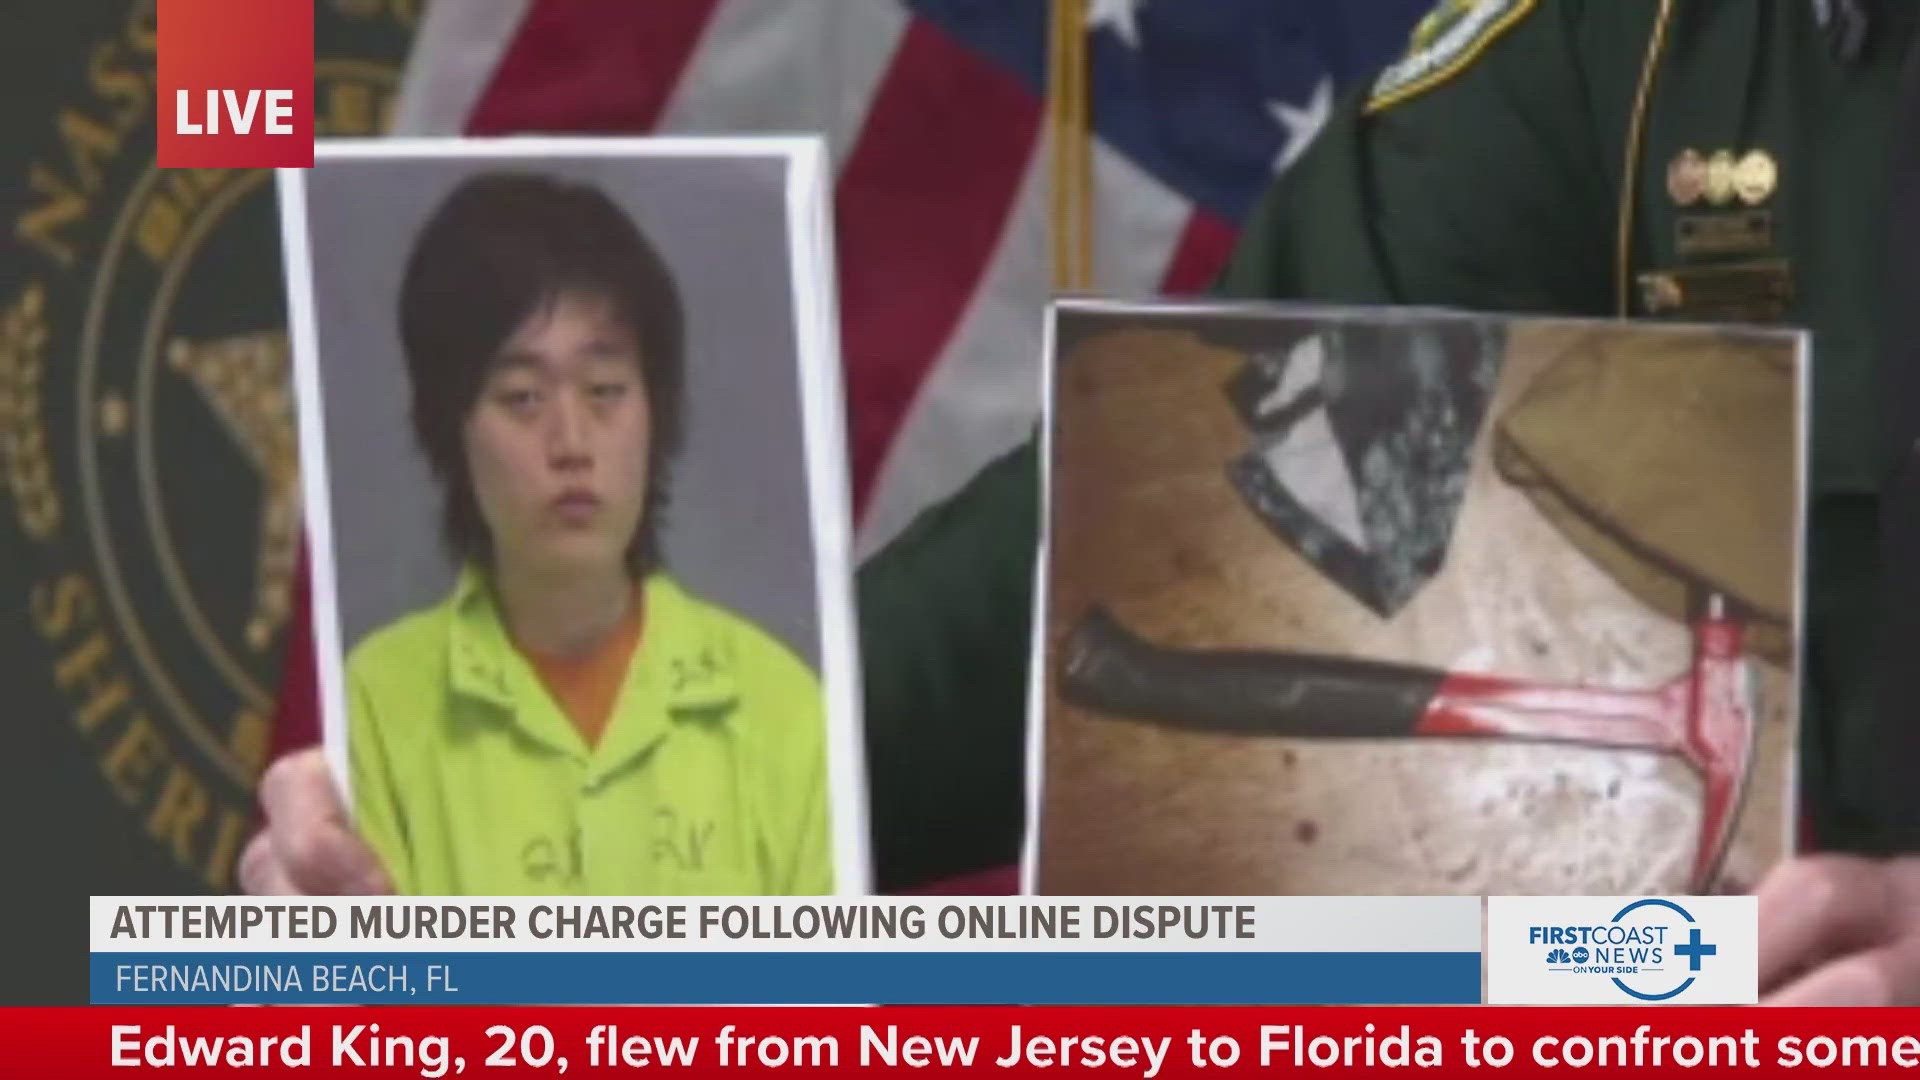 Edward Kang, 20, flew from New Jersey to Florida to confront someone he met during an online video game, according to Nassau County Sheriff Bill Leeper.